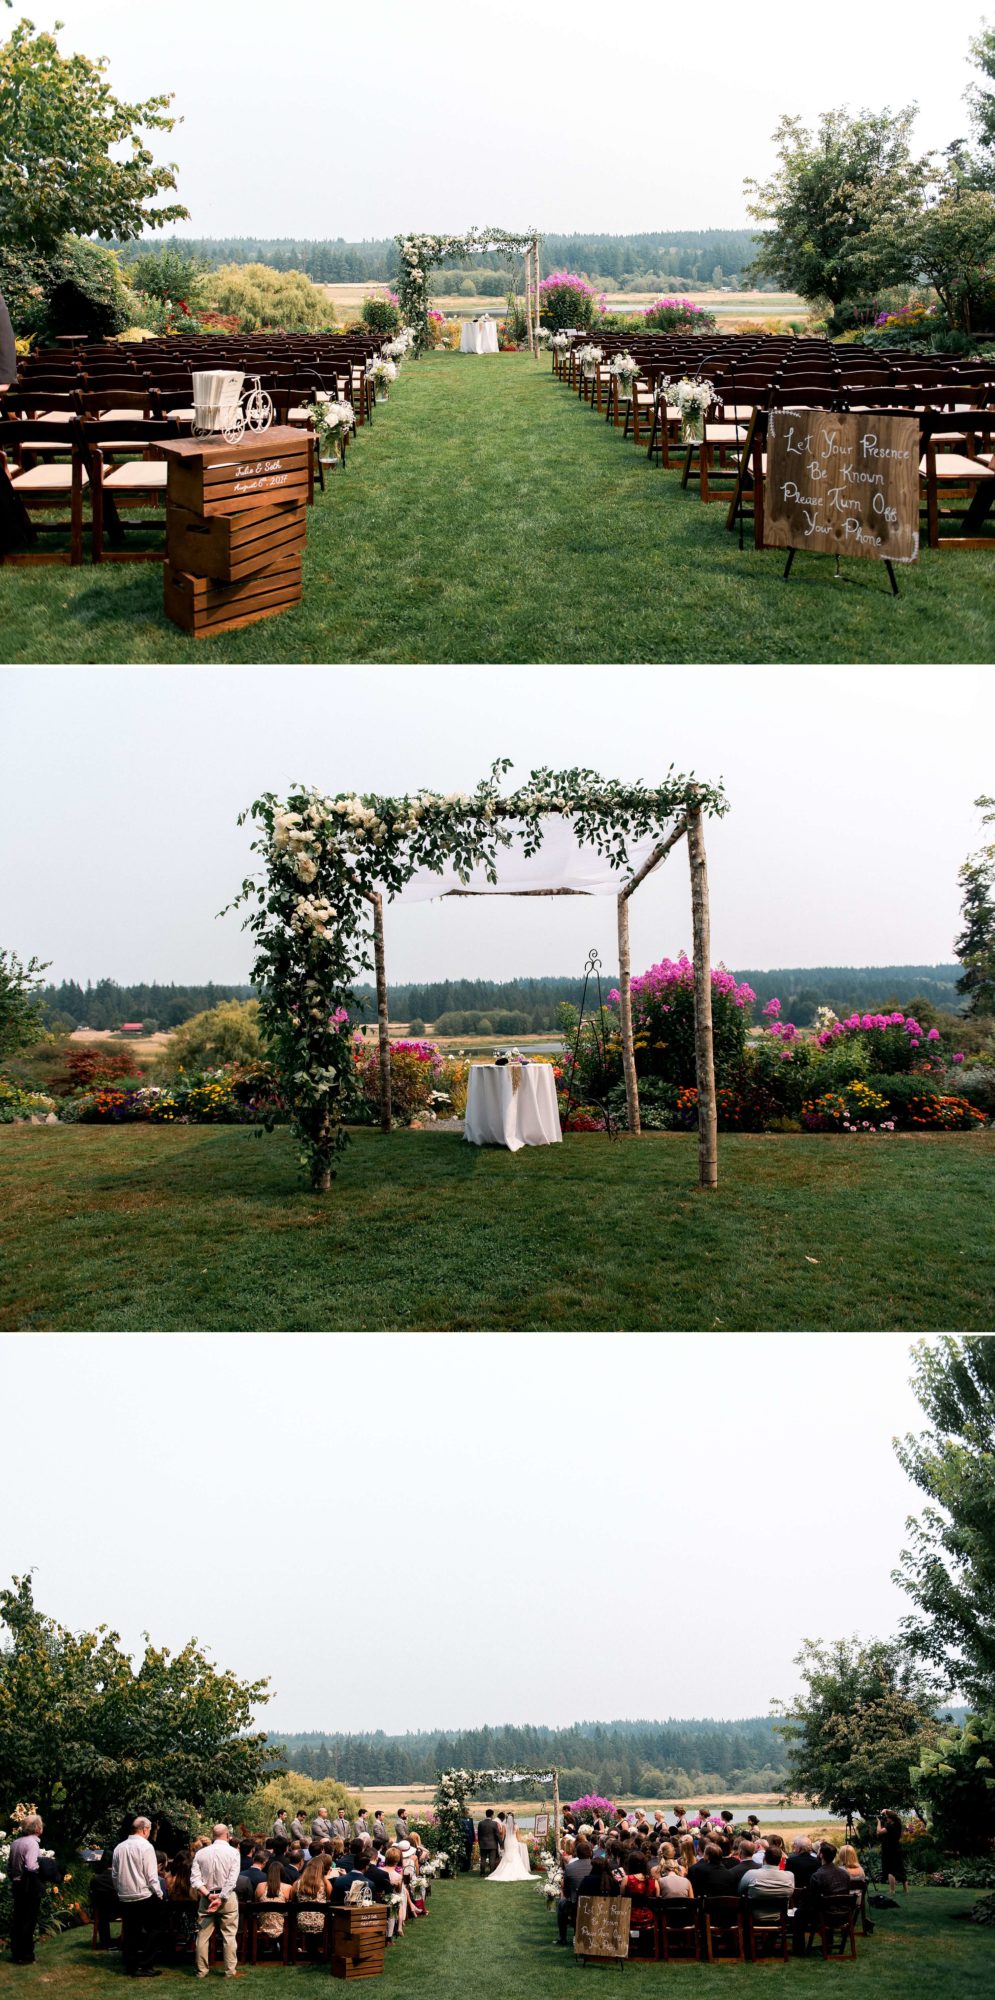 Fireseed catering wedding outdoor ceremony decor